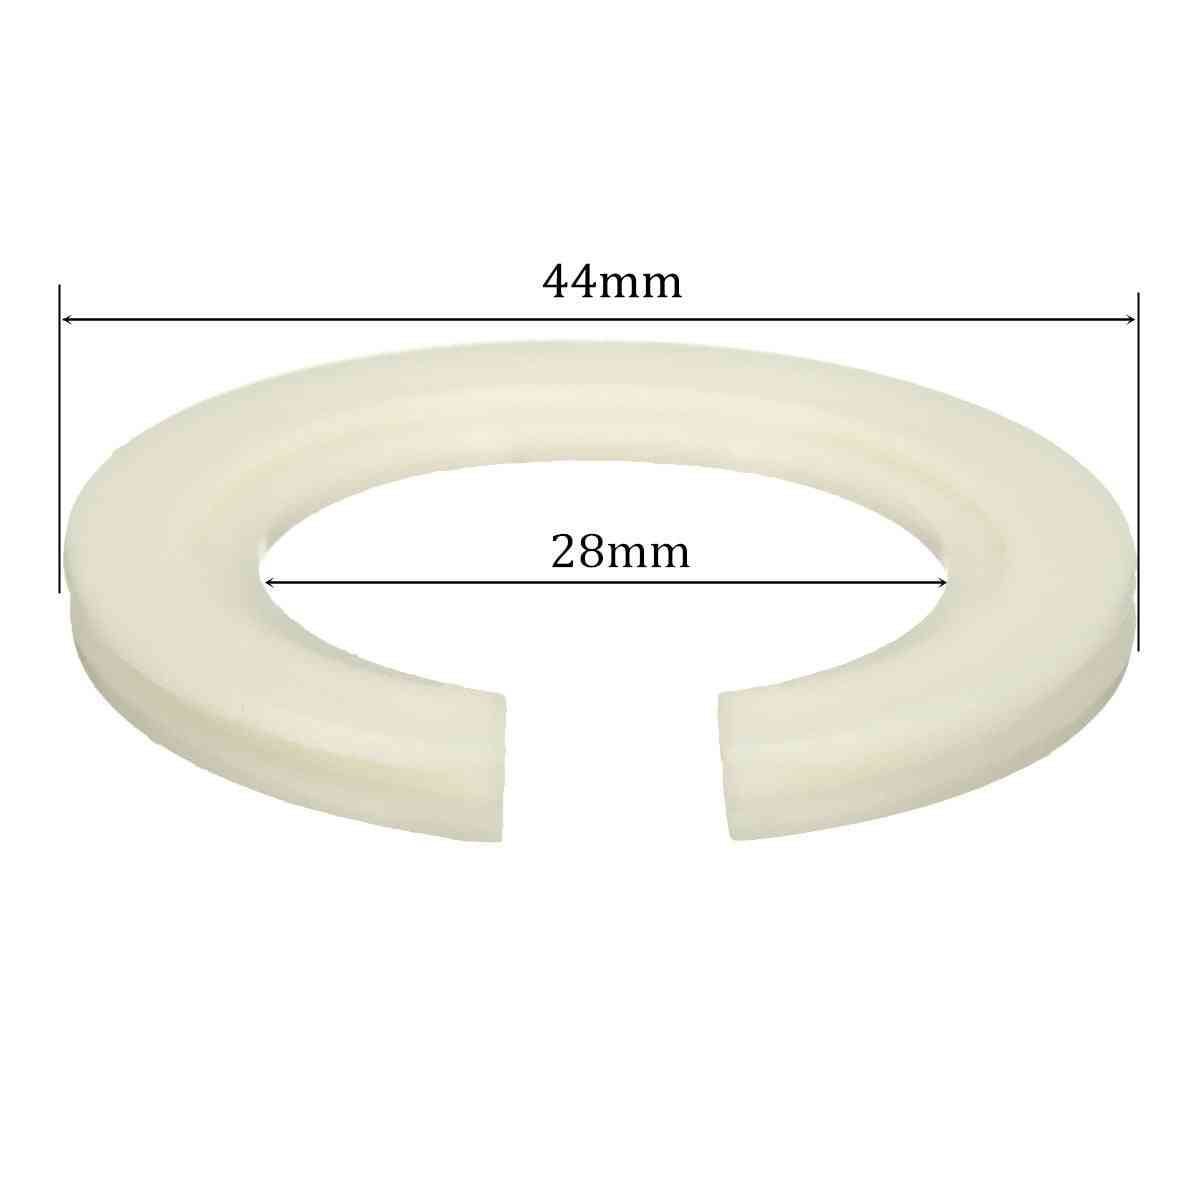 E27 To E14 Lampshade Ring Adapter